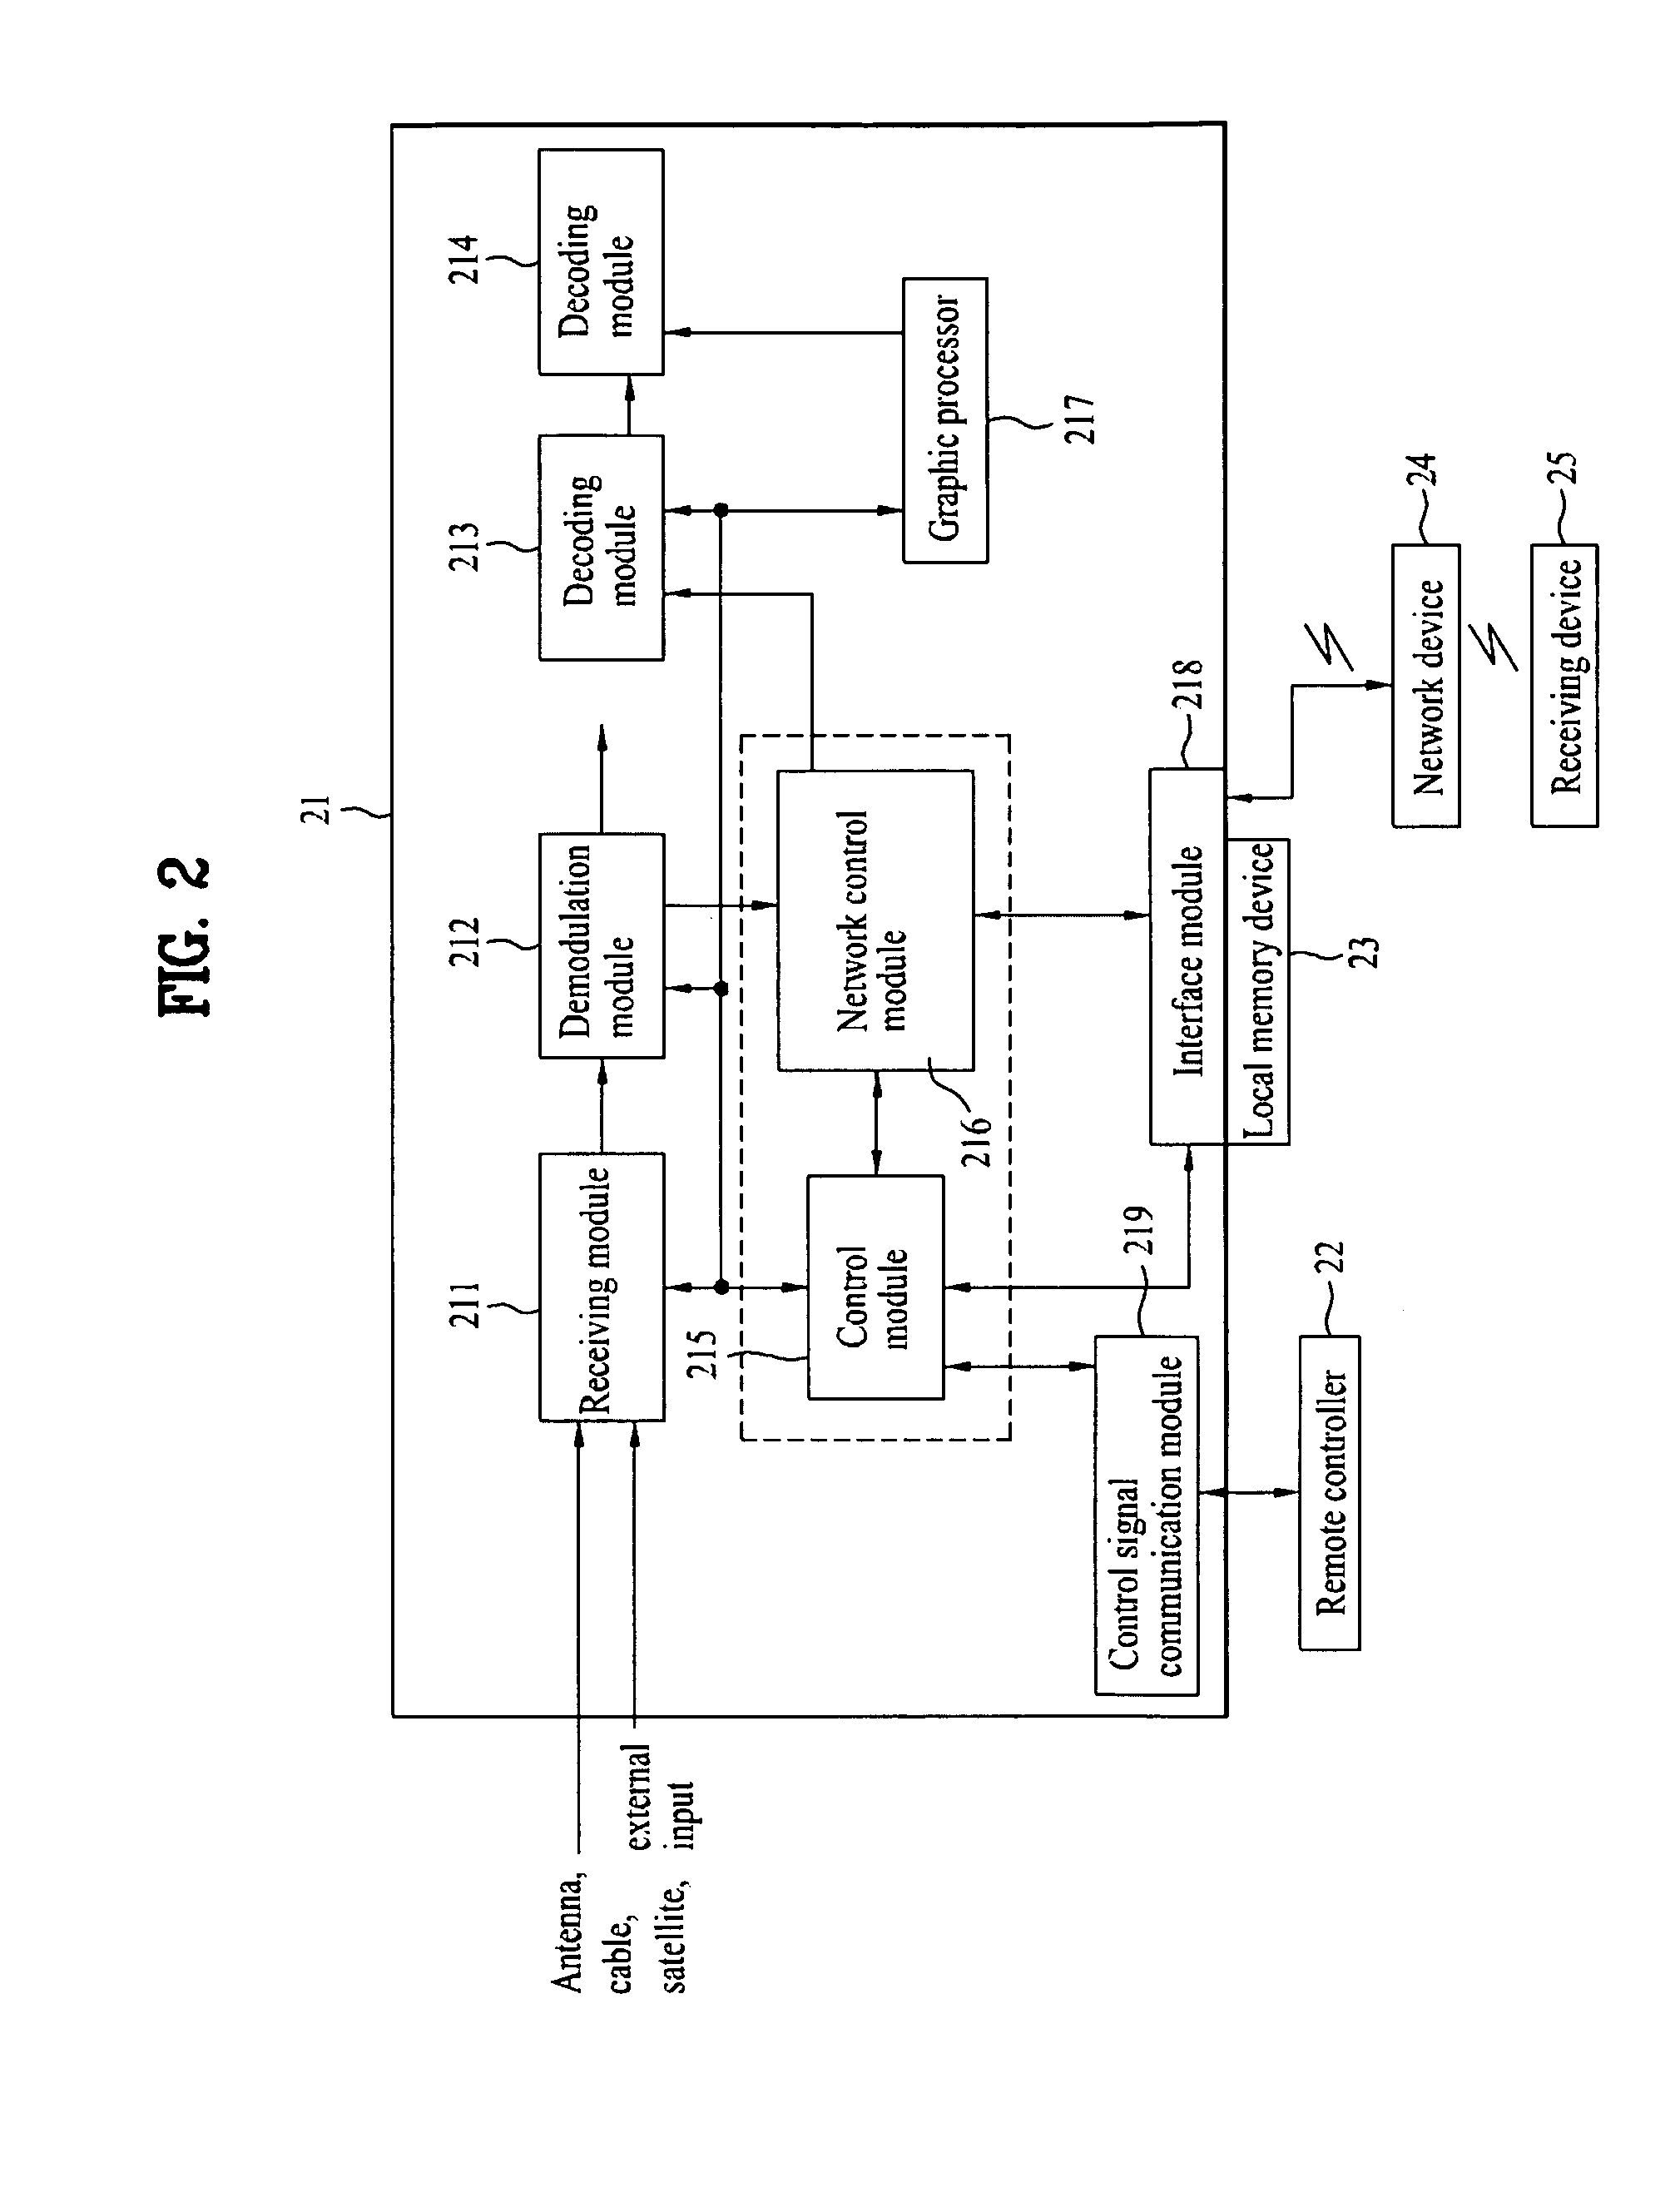 Method of exchanging messages, sink device and source device